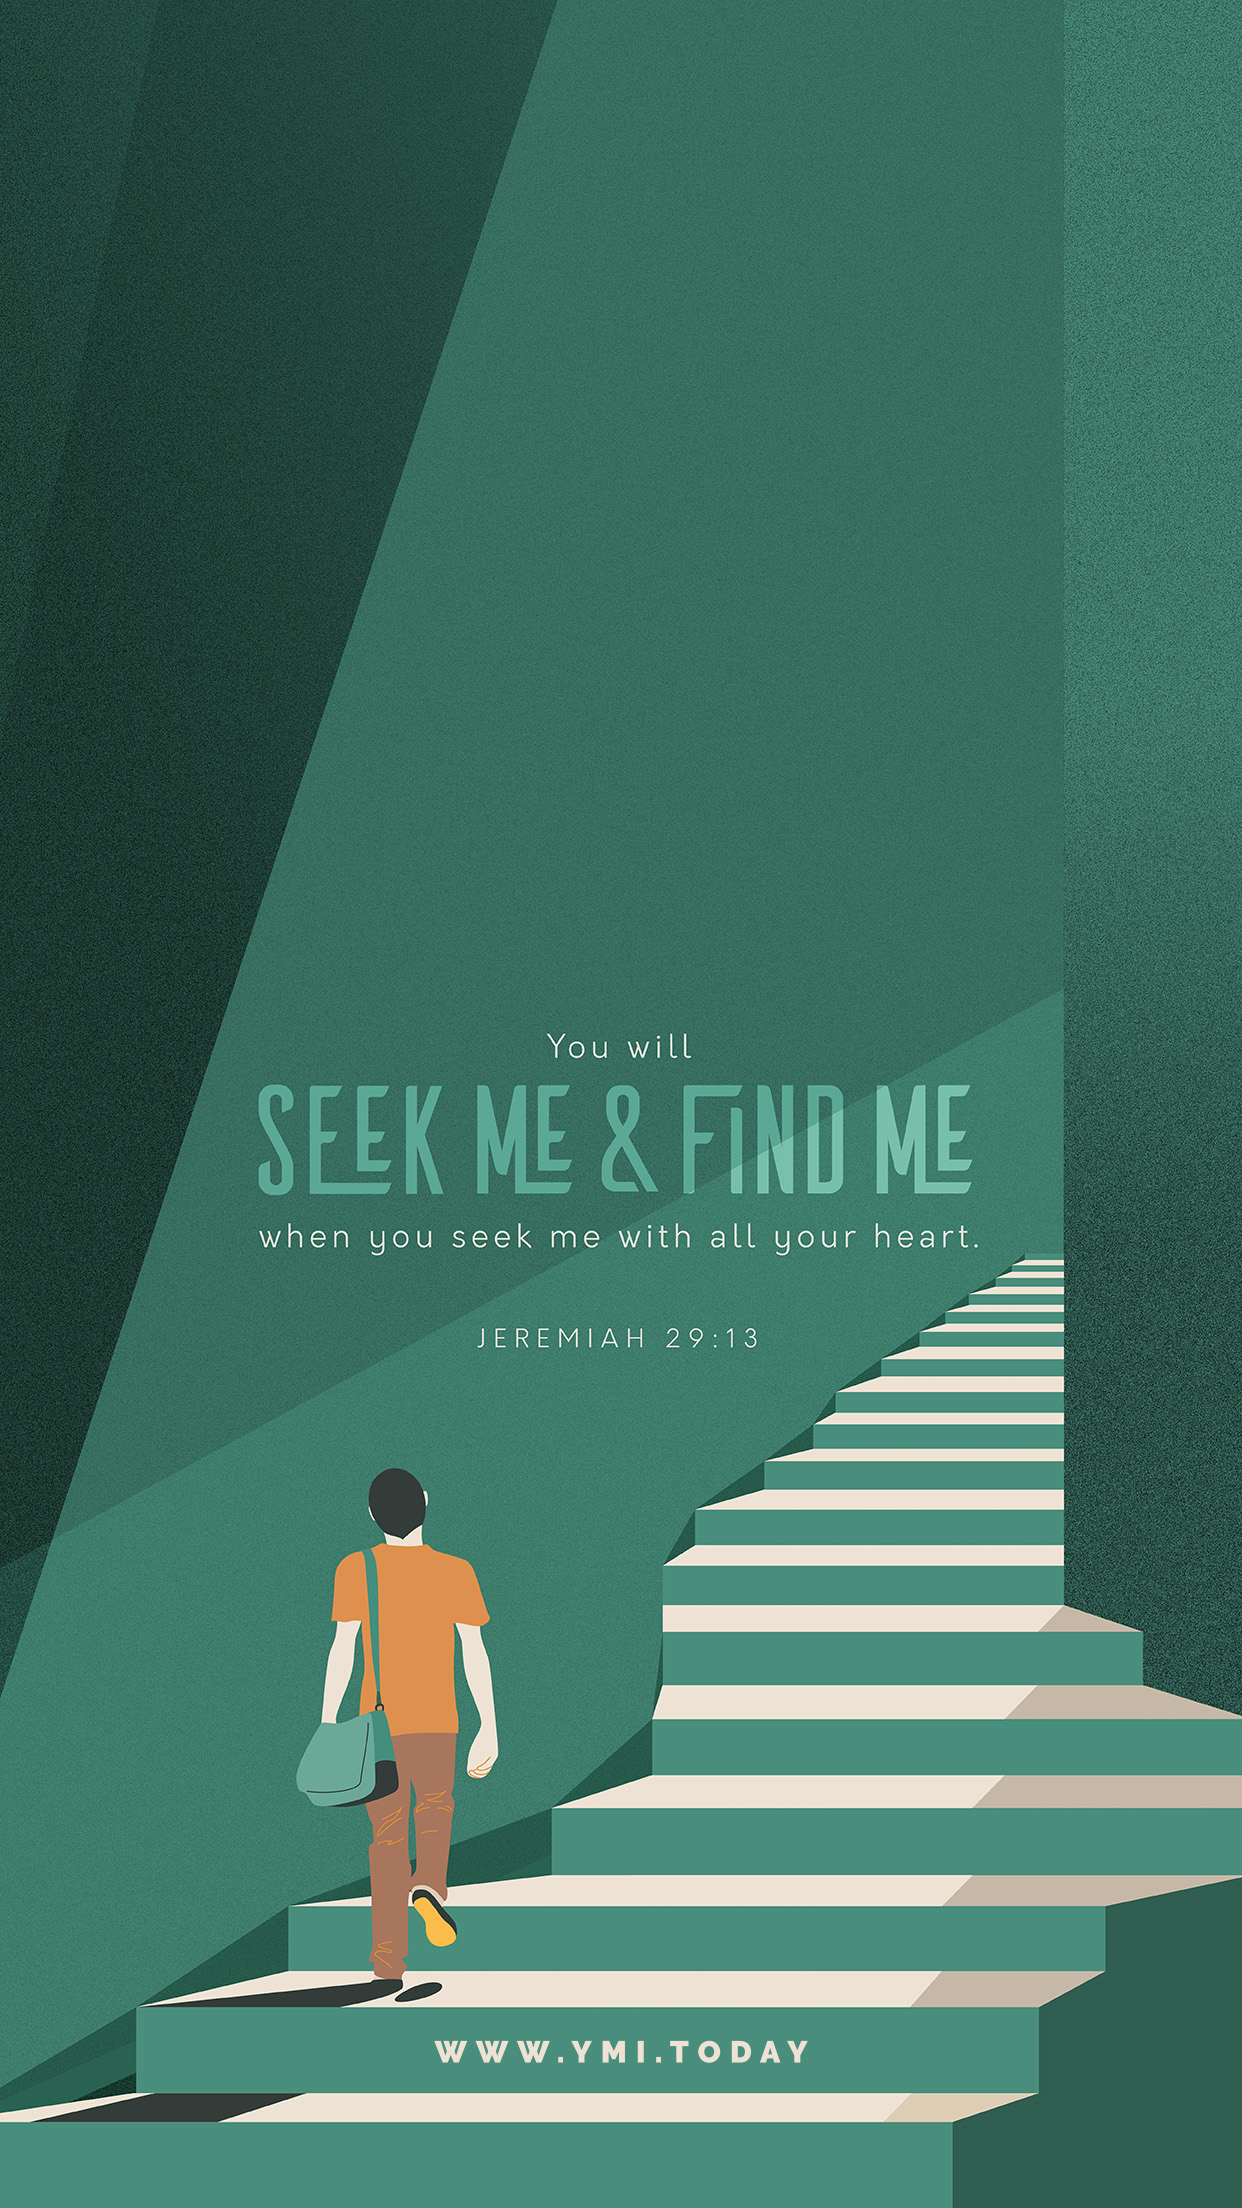 YMI March 2019 Phone Lockscreen - You will seek Me and find Me when you seek Me with all your heart. - Jeremiah 29:13